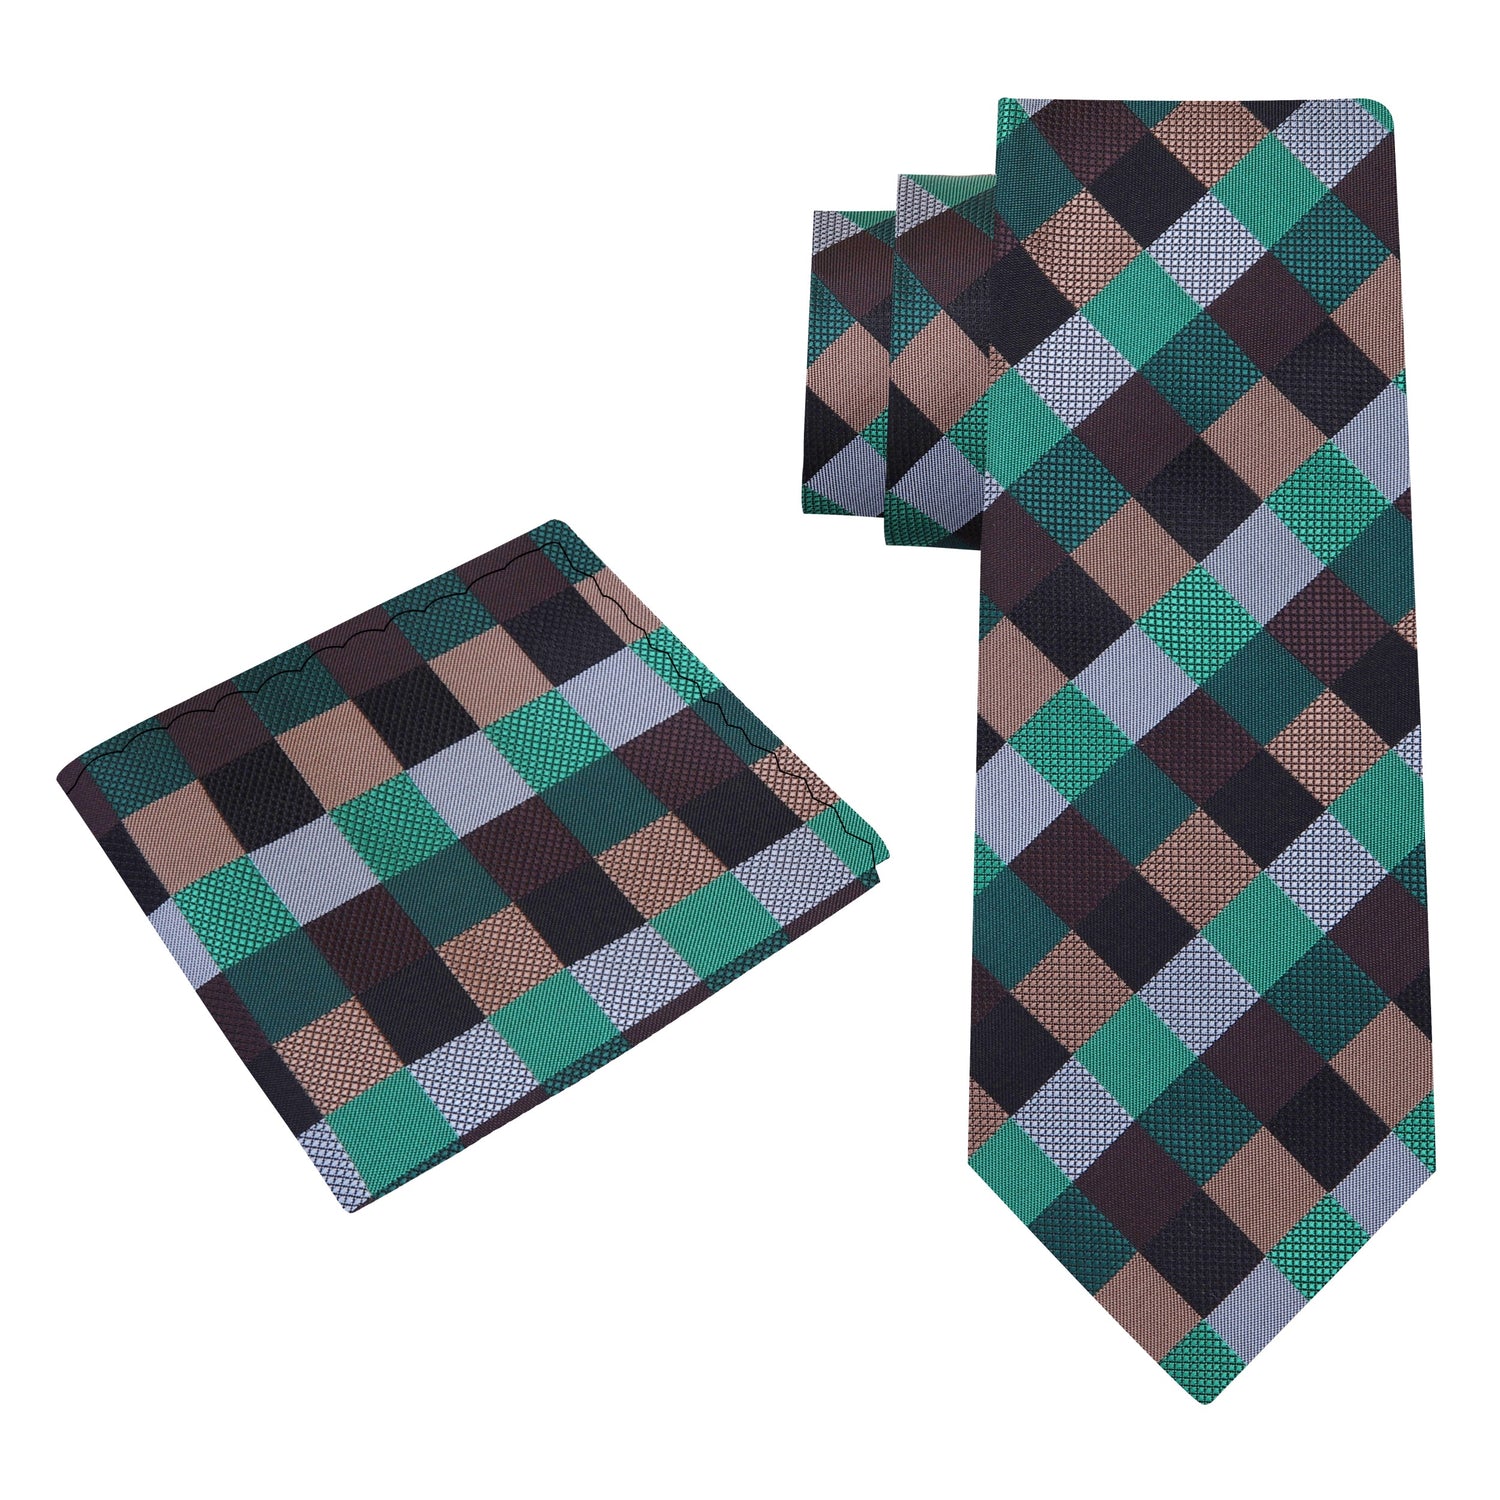 Alt View: Black, Green, Brown, Grey Check Tie and Pocket Square